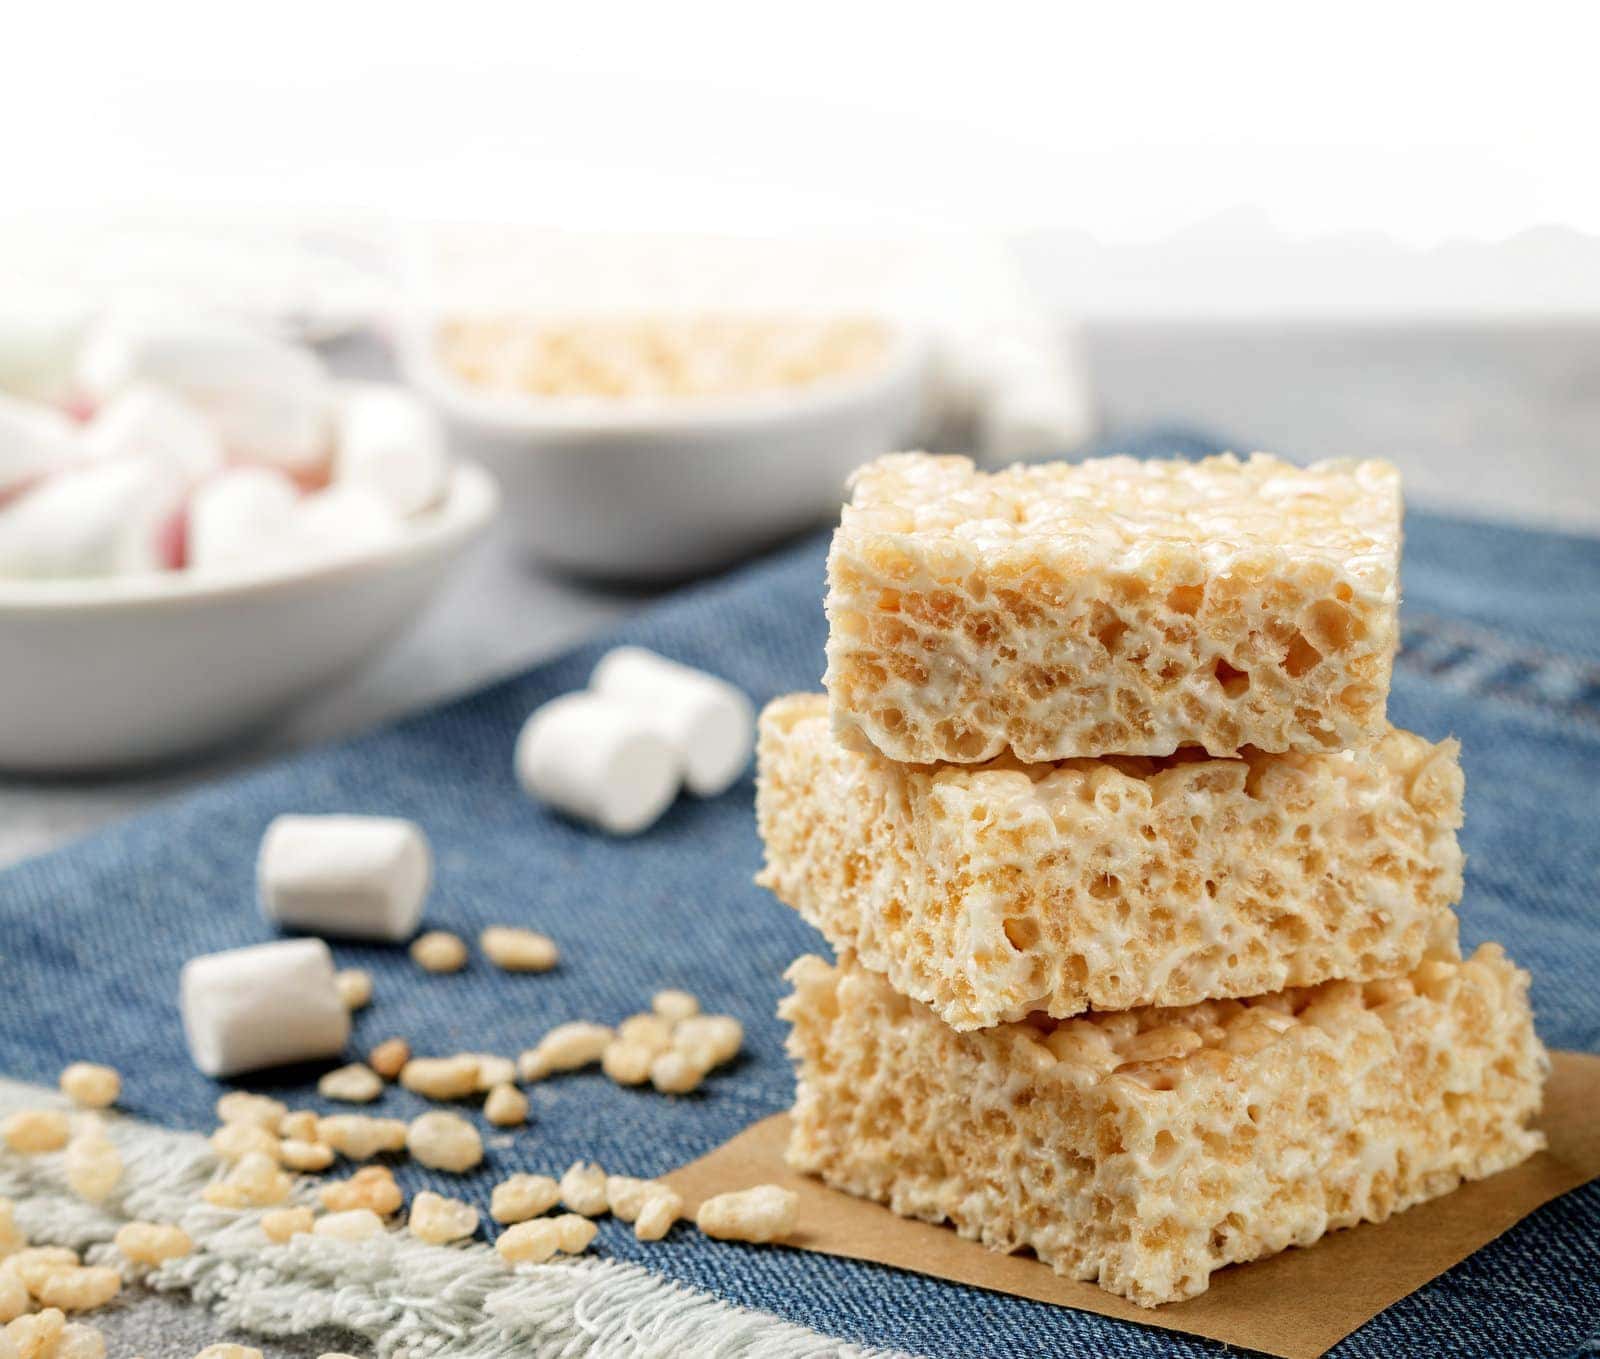 10-rice-crispy-cereal-nutrition-facts